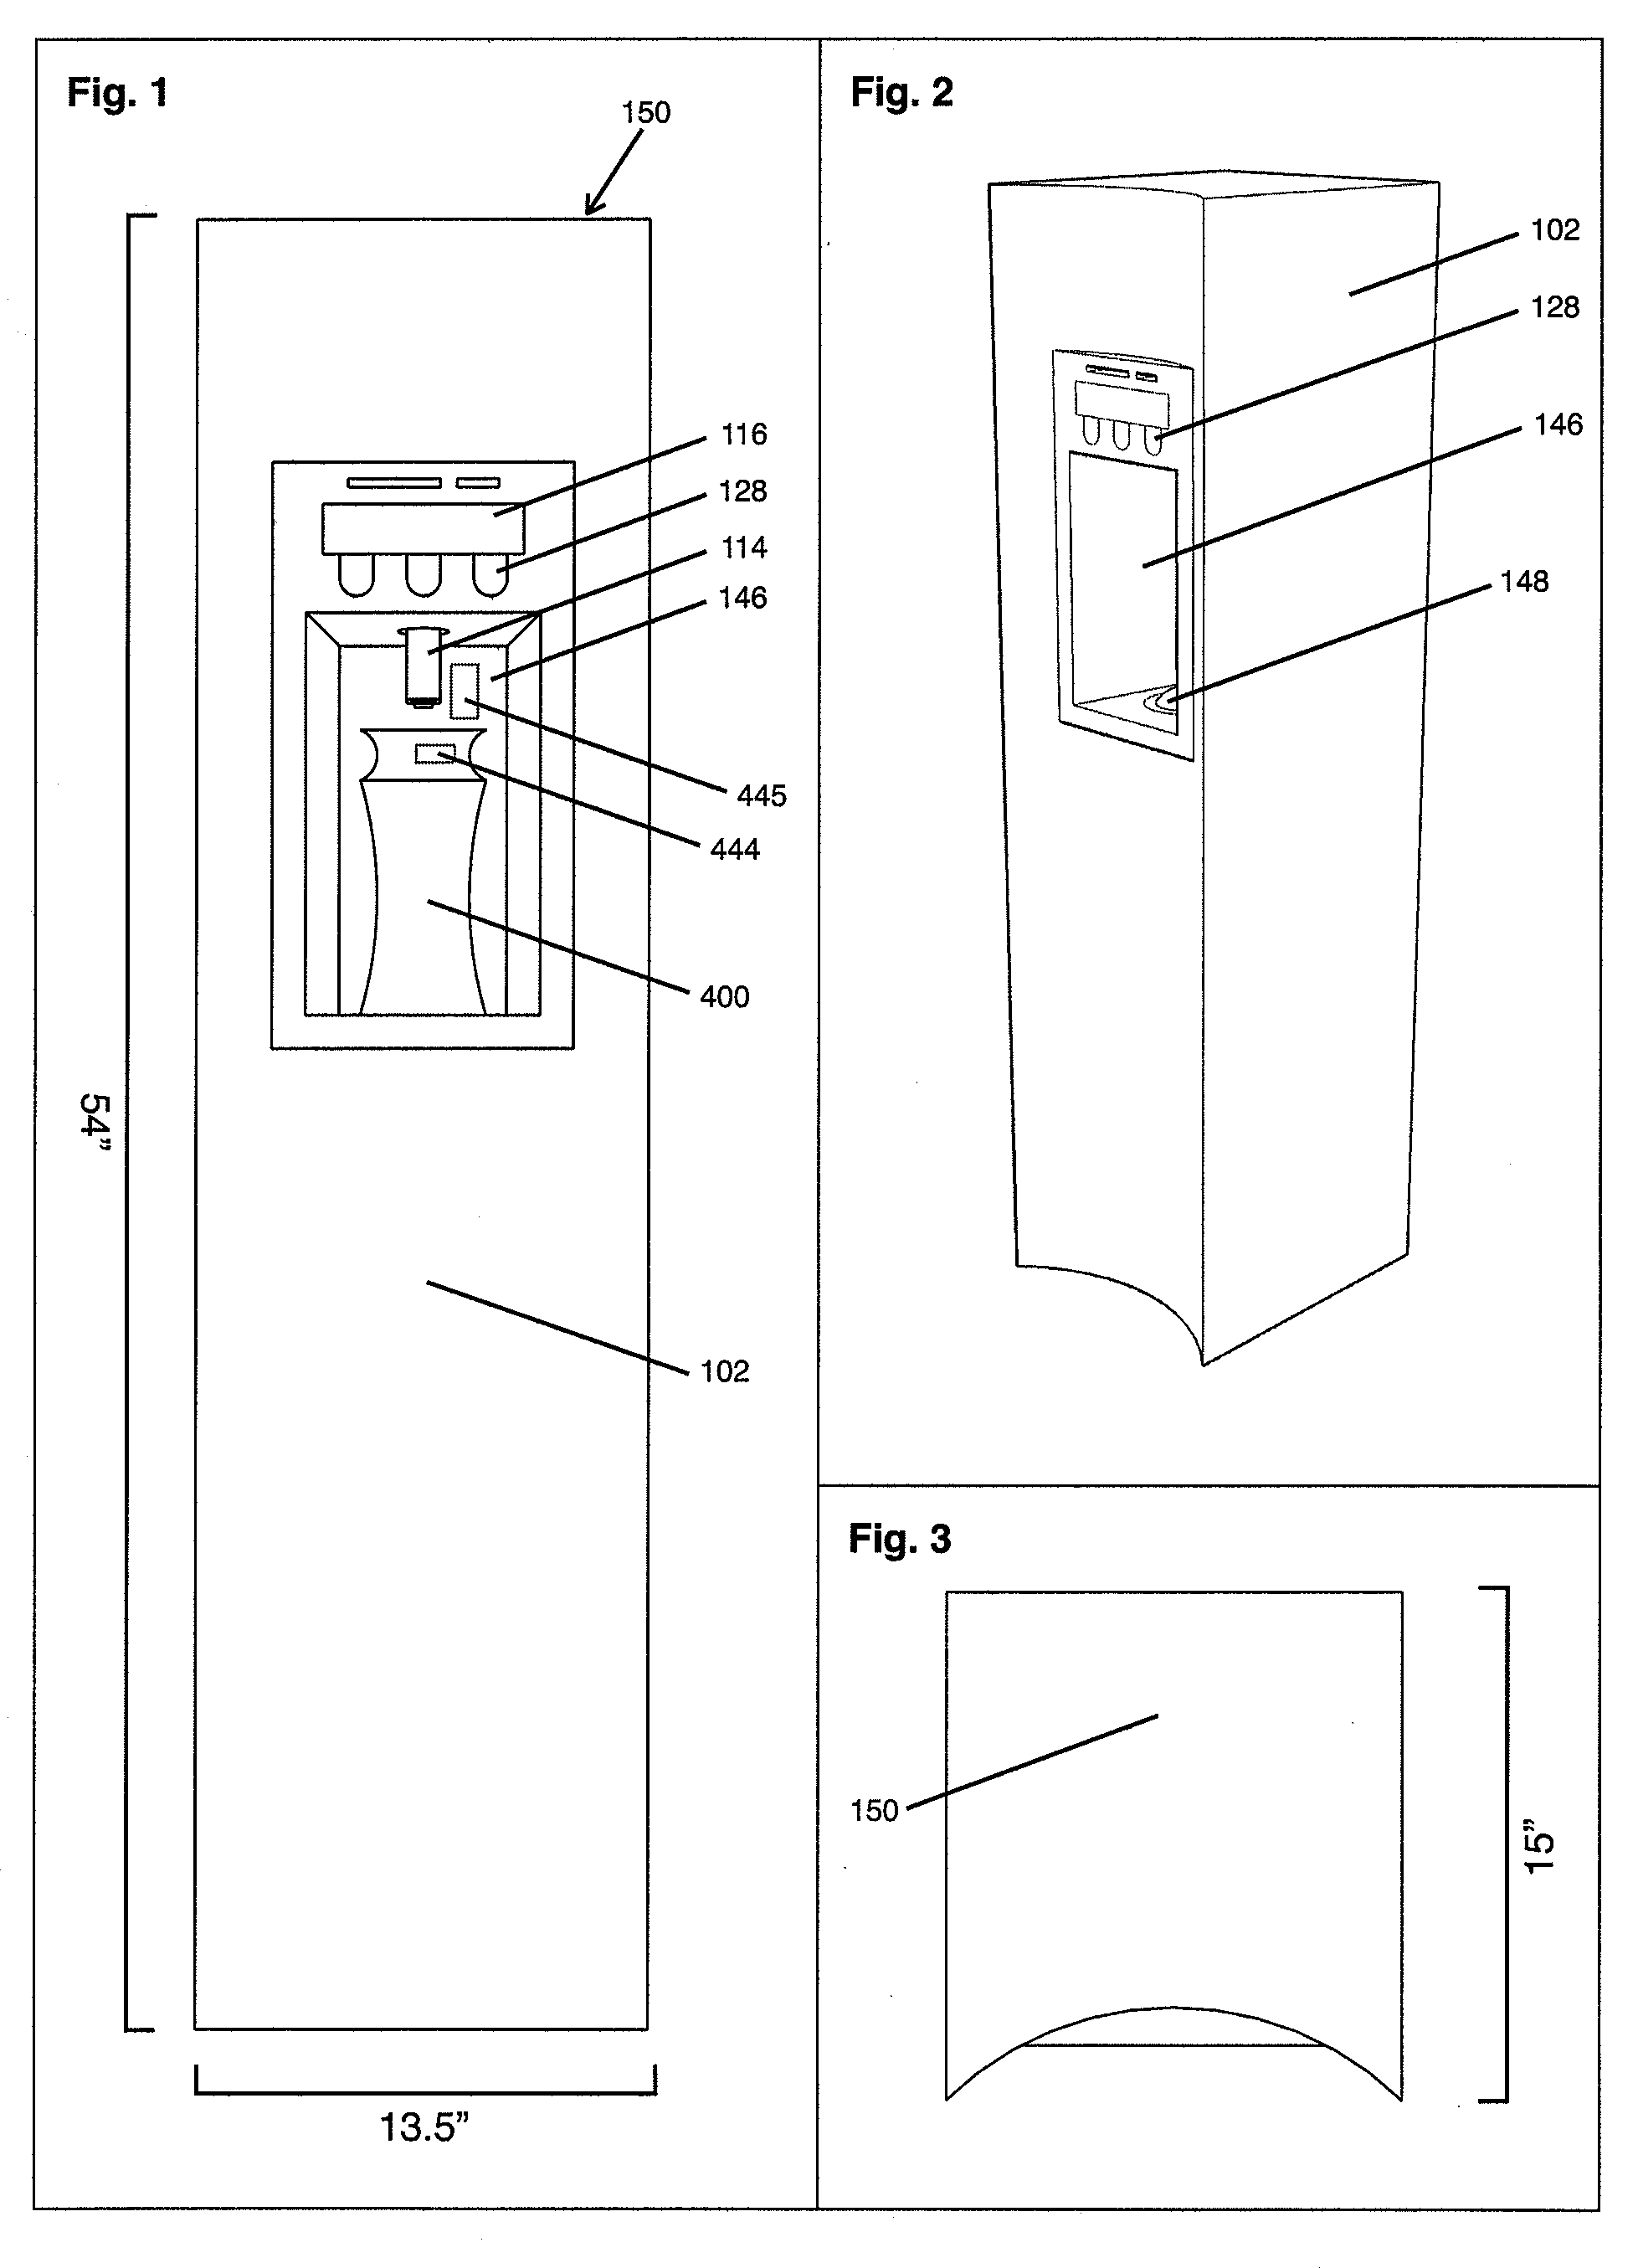 Apparatus and system for liquid dispensing and storage